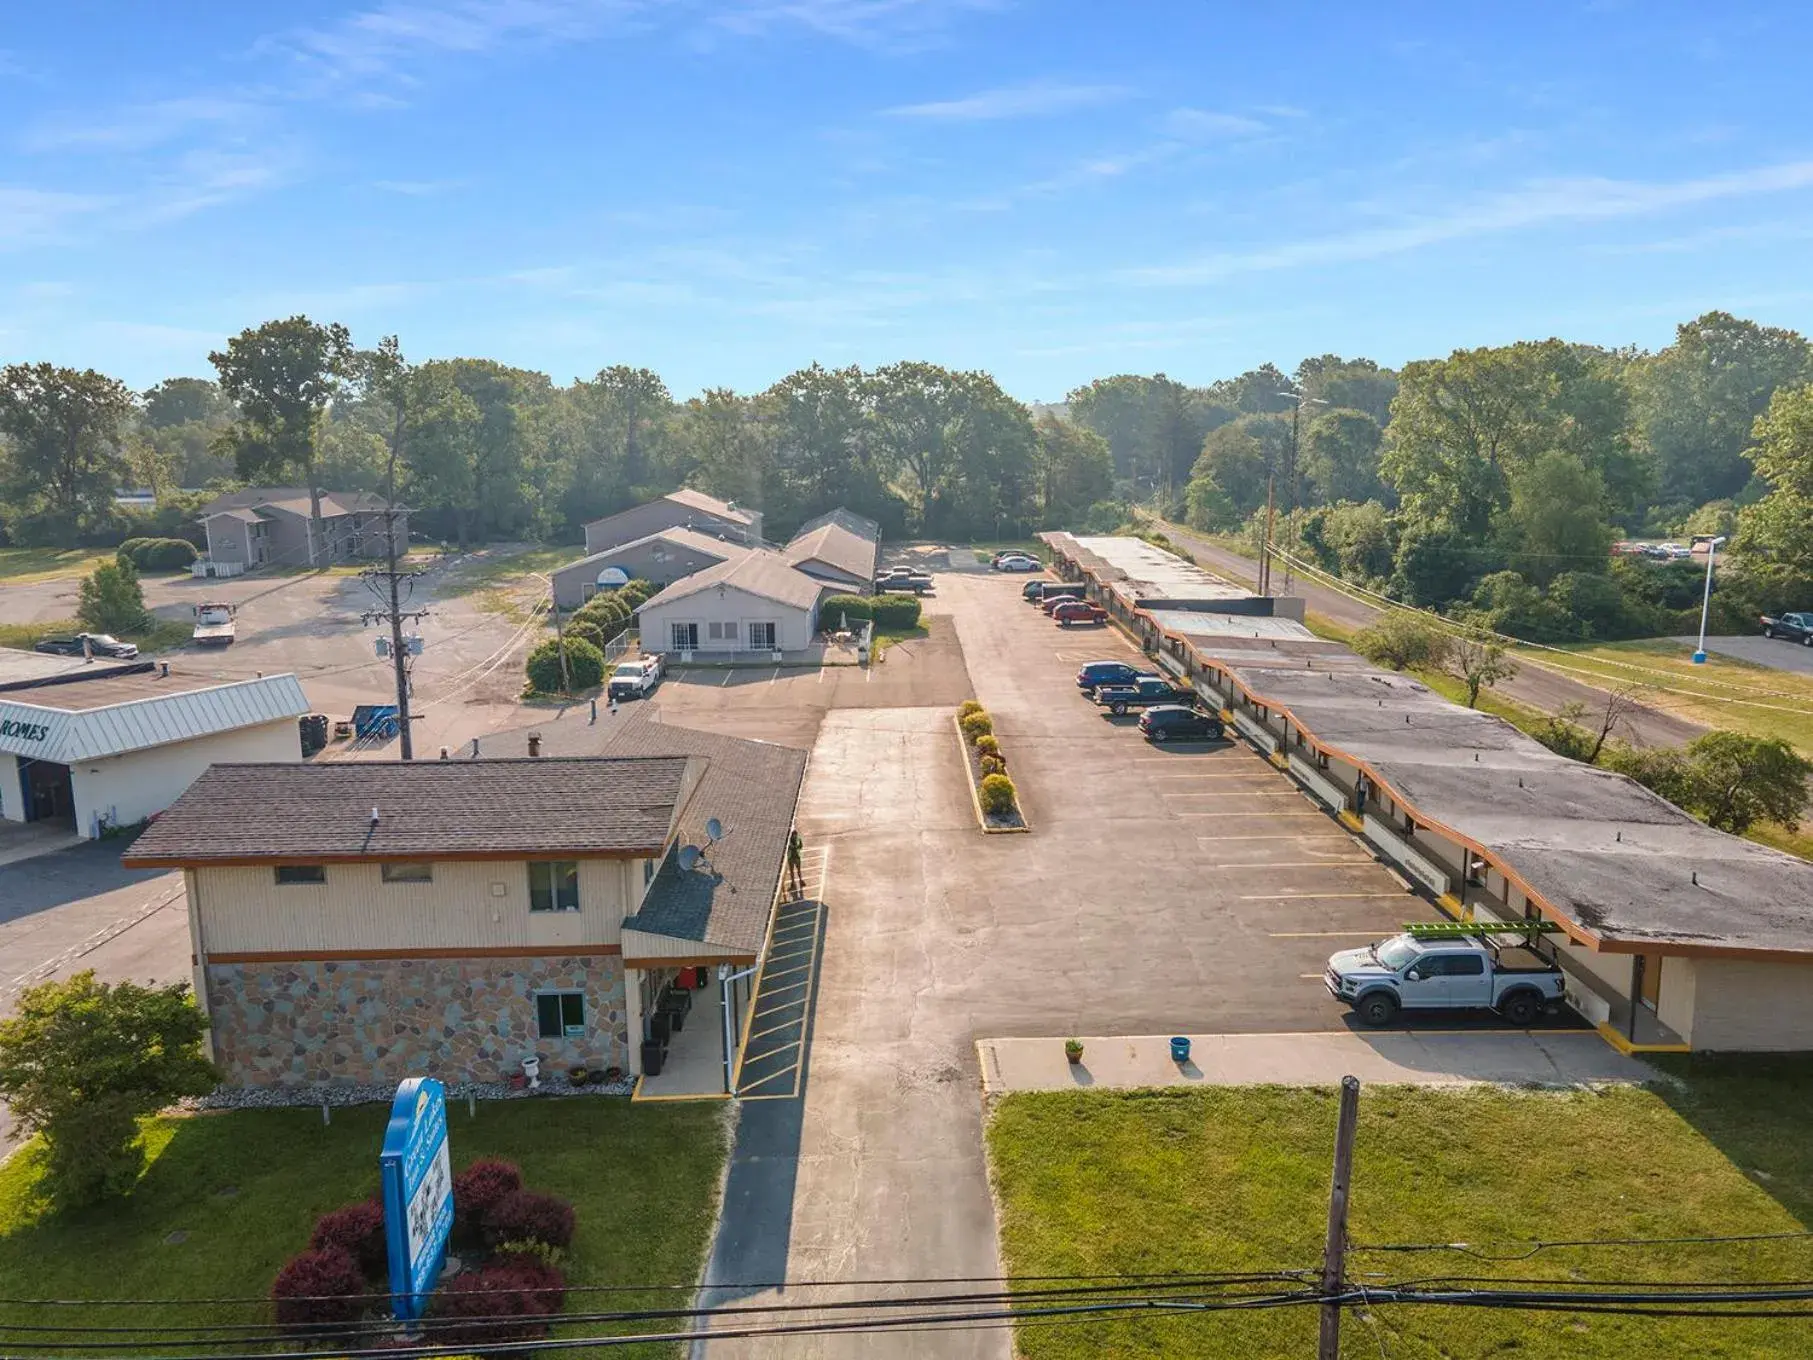 Property building, Bird's-eye View in Great Lakes Inn & Suites